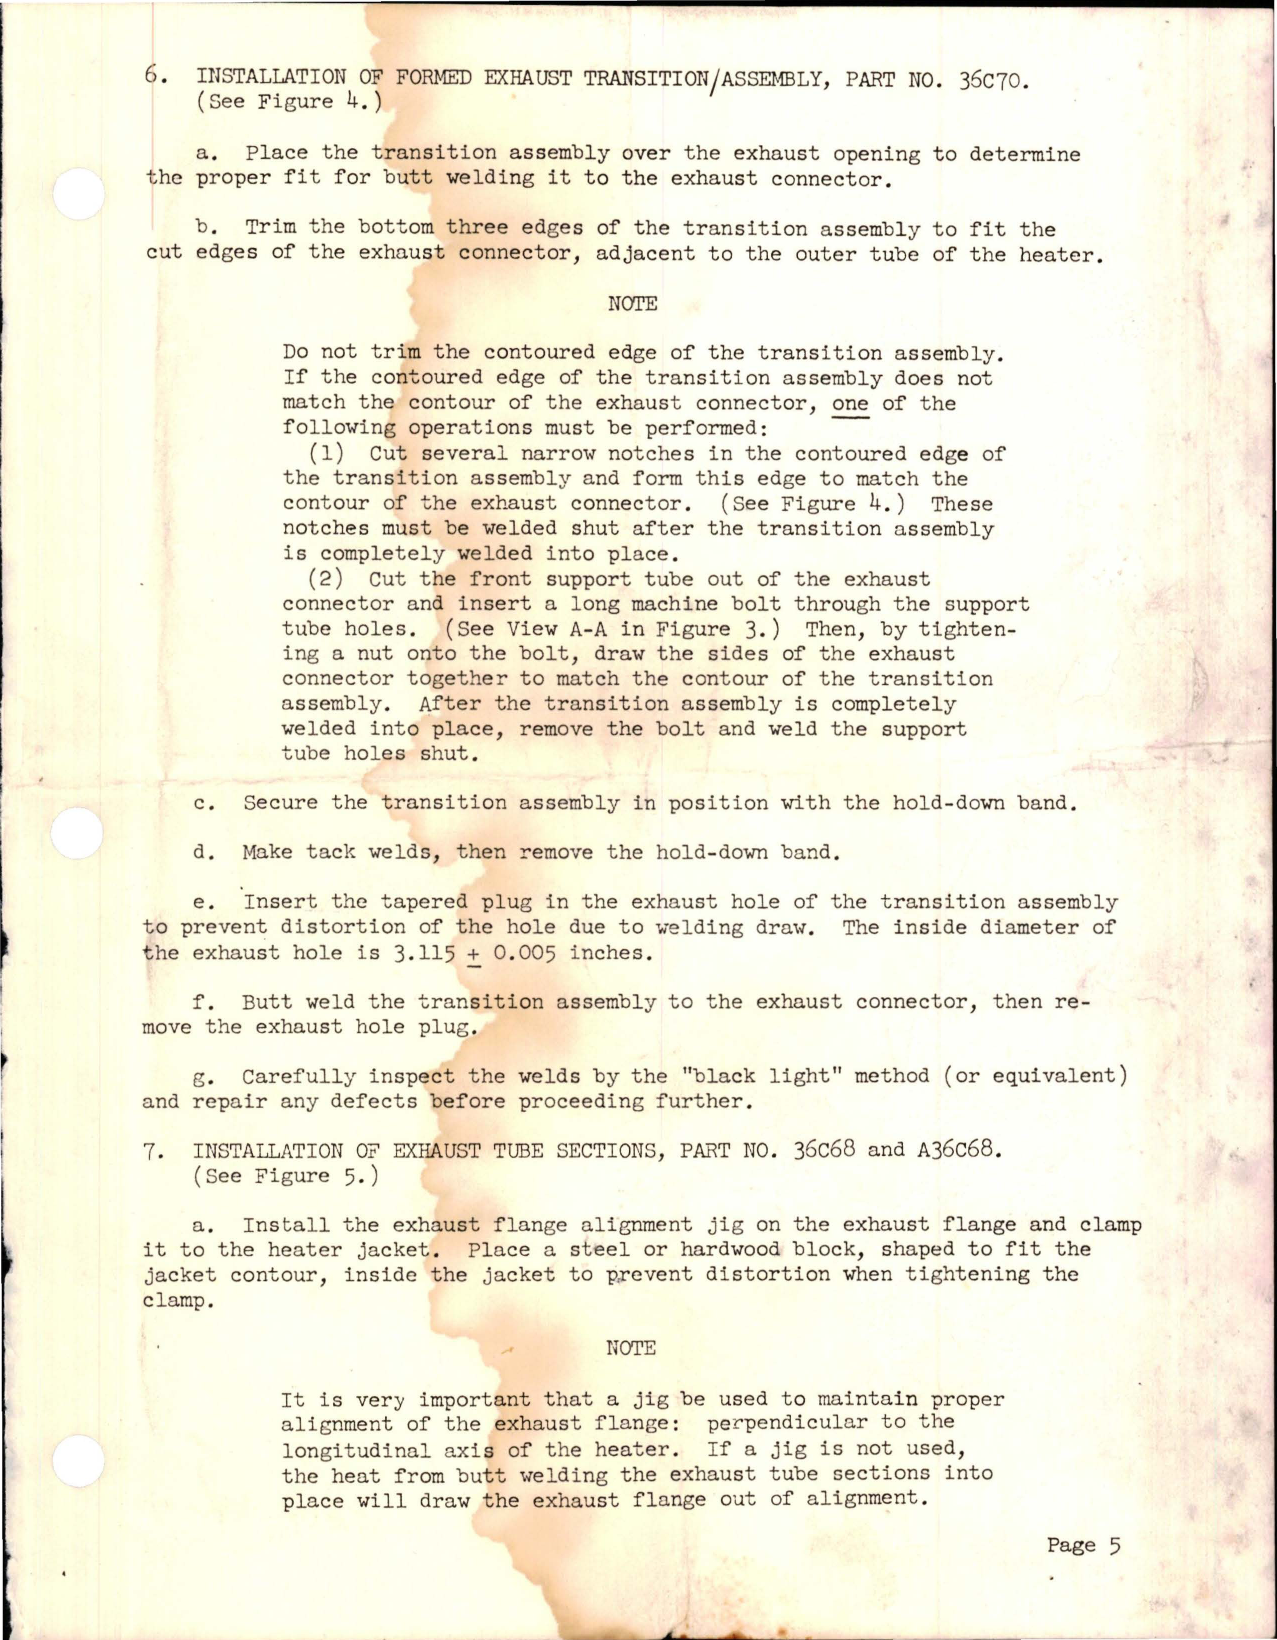 Sample page 5 from AirCorps Library document: Installation Instructions for DC-6 and DC-7 Aircraft Heater Exhaust Repair Kit - Part 33C40